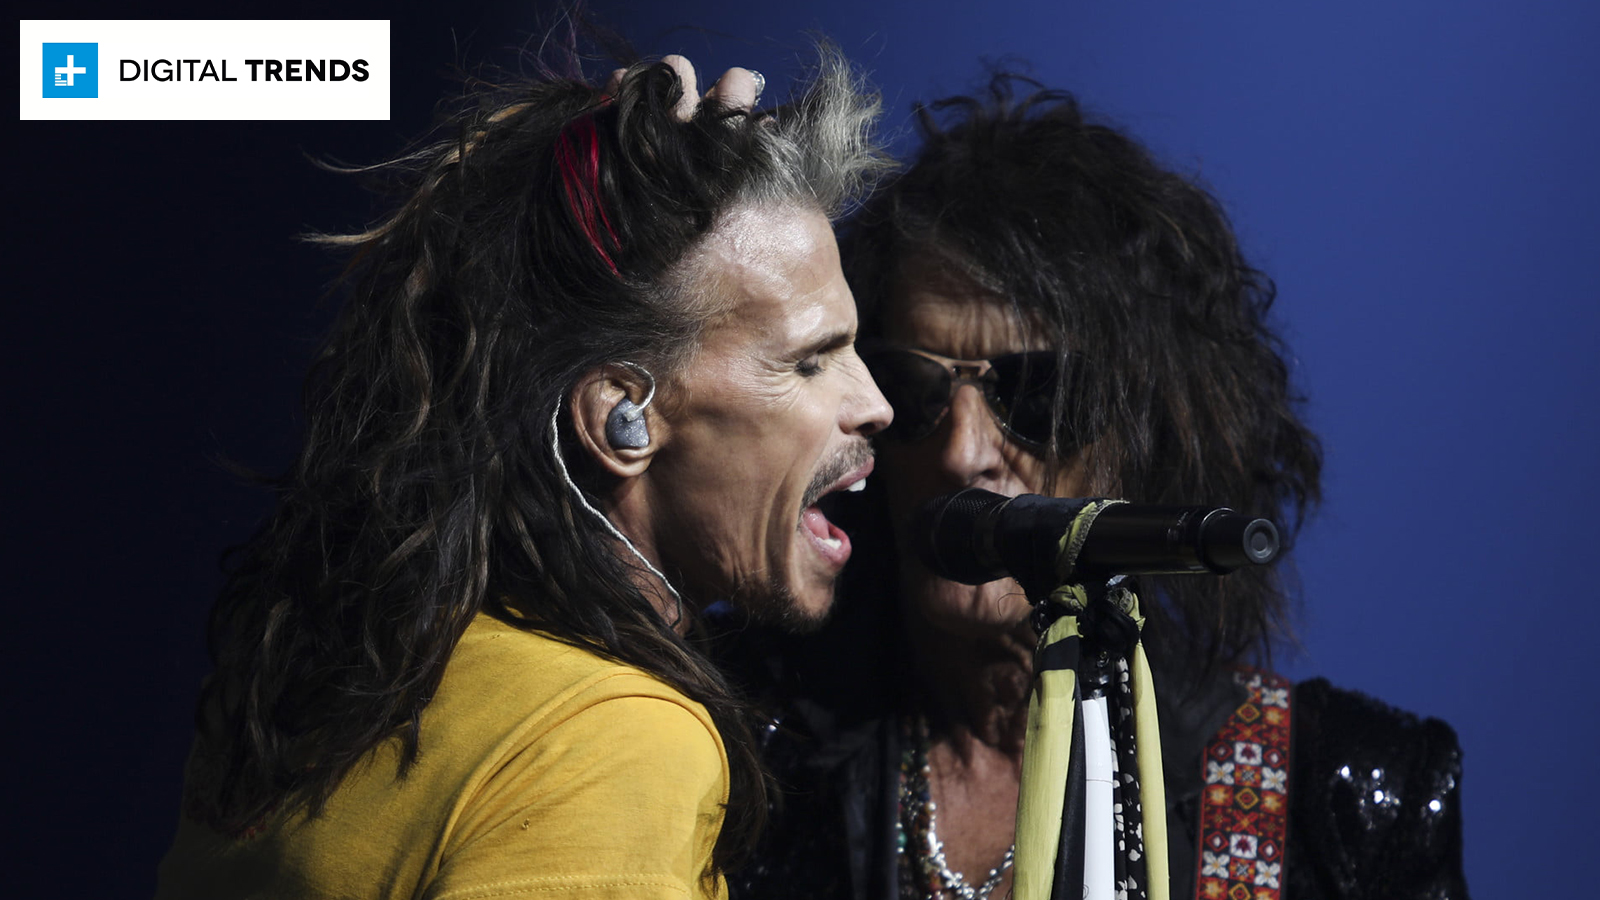 Dream on: The concert of the future is in Vegas, and Aerosmith leads the charge